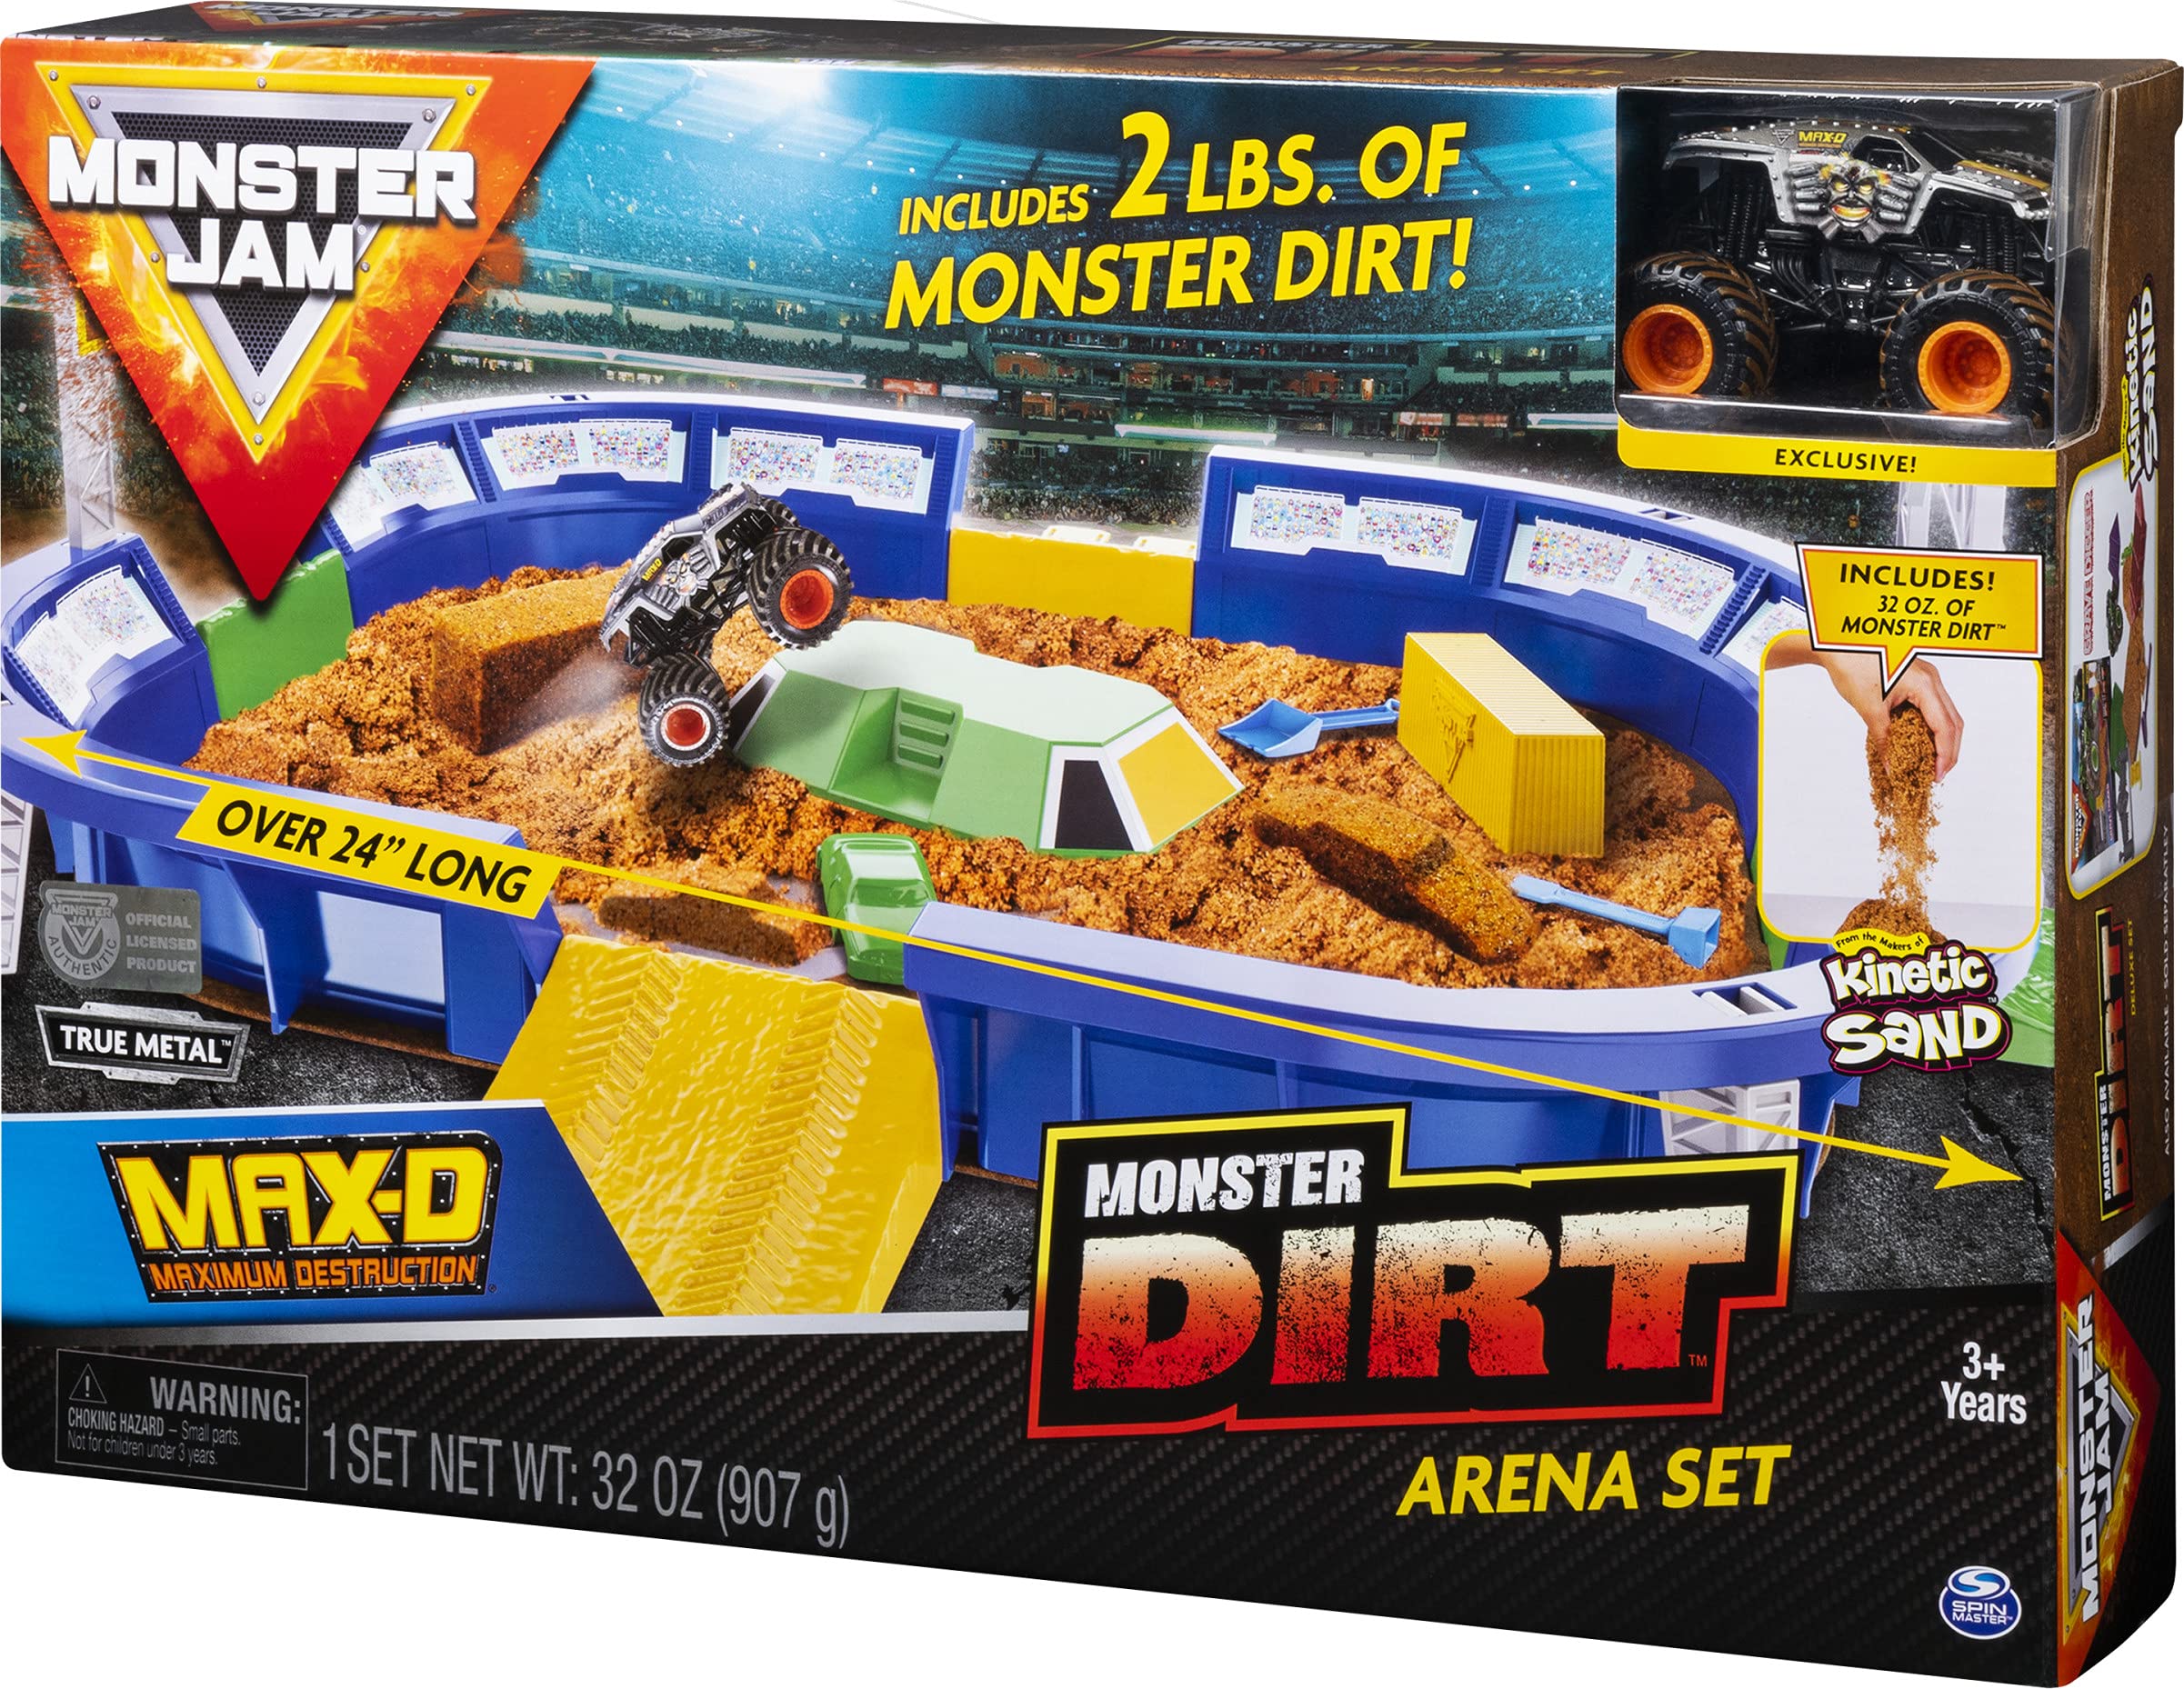 Monster Jam, Monster Dirt Arena 24-Inch Playset with 2lbs of Monster Dirt and Exclusive 1:64 Scale Die-Cast Monster Jam Truck